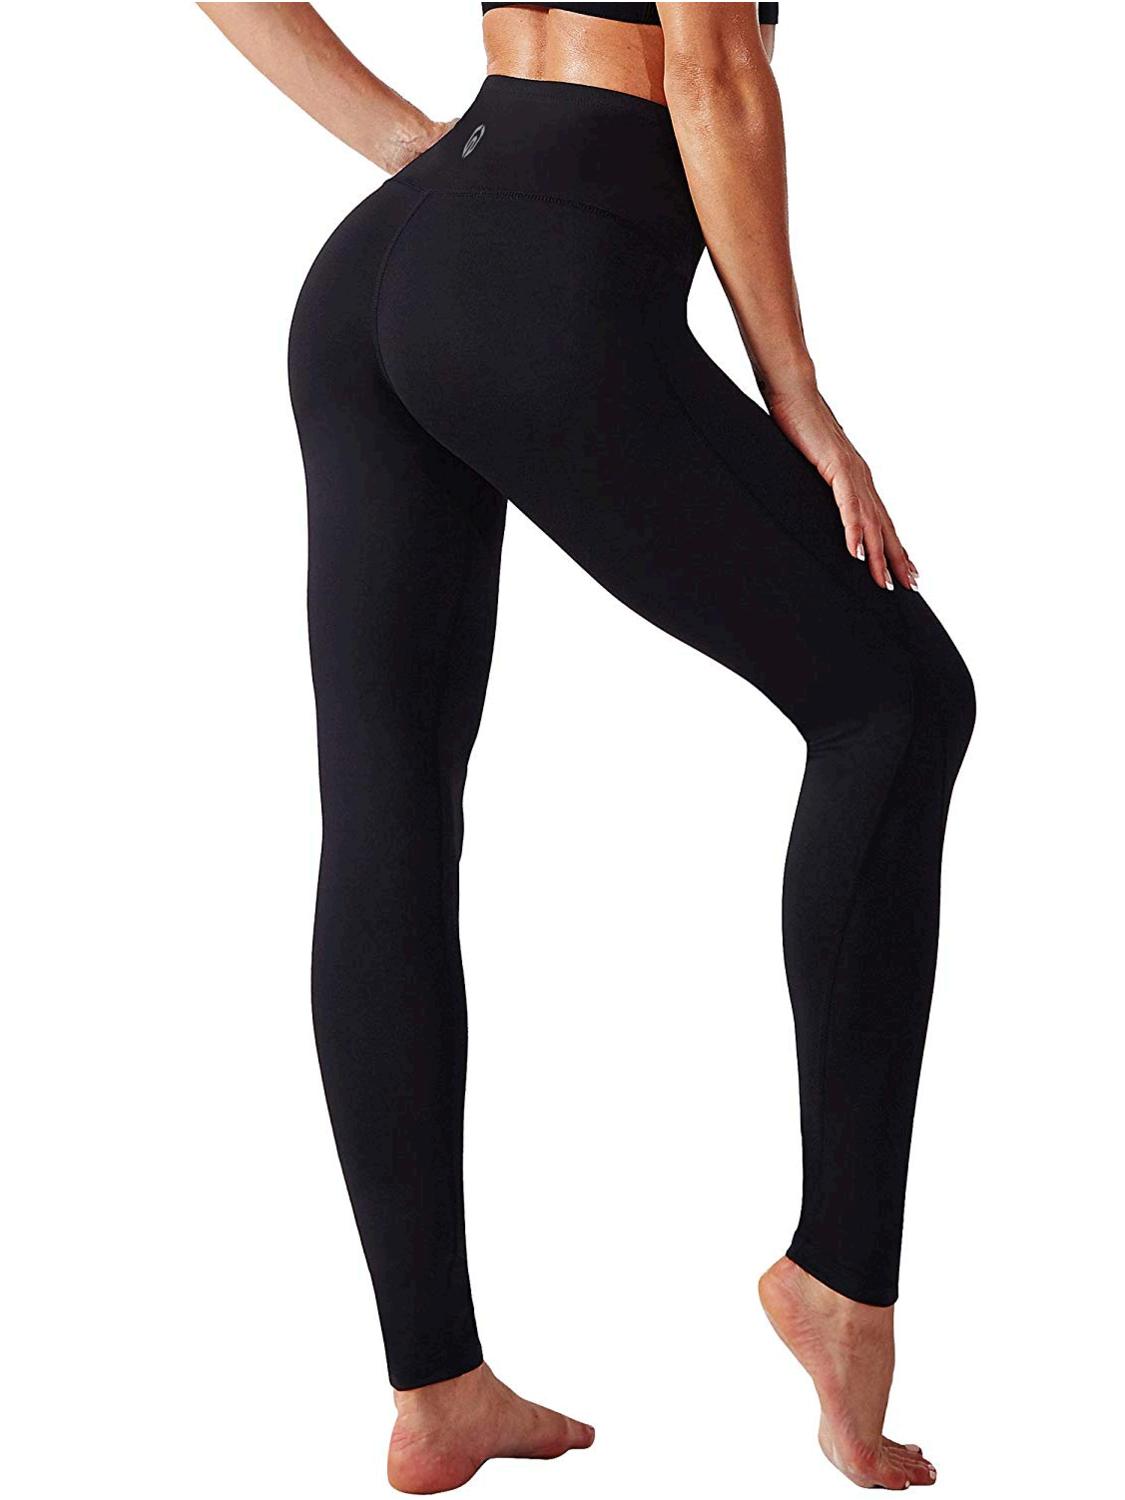 Leggings Buying Guide: The Perfect Pair for Your Every Need